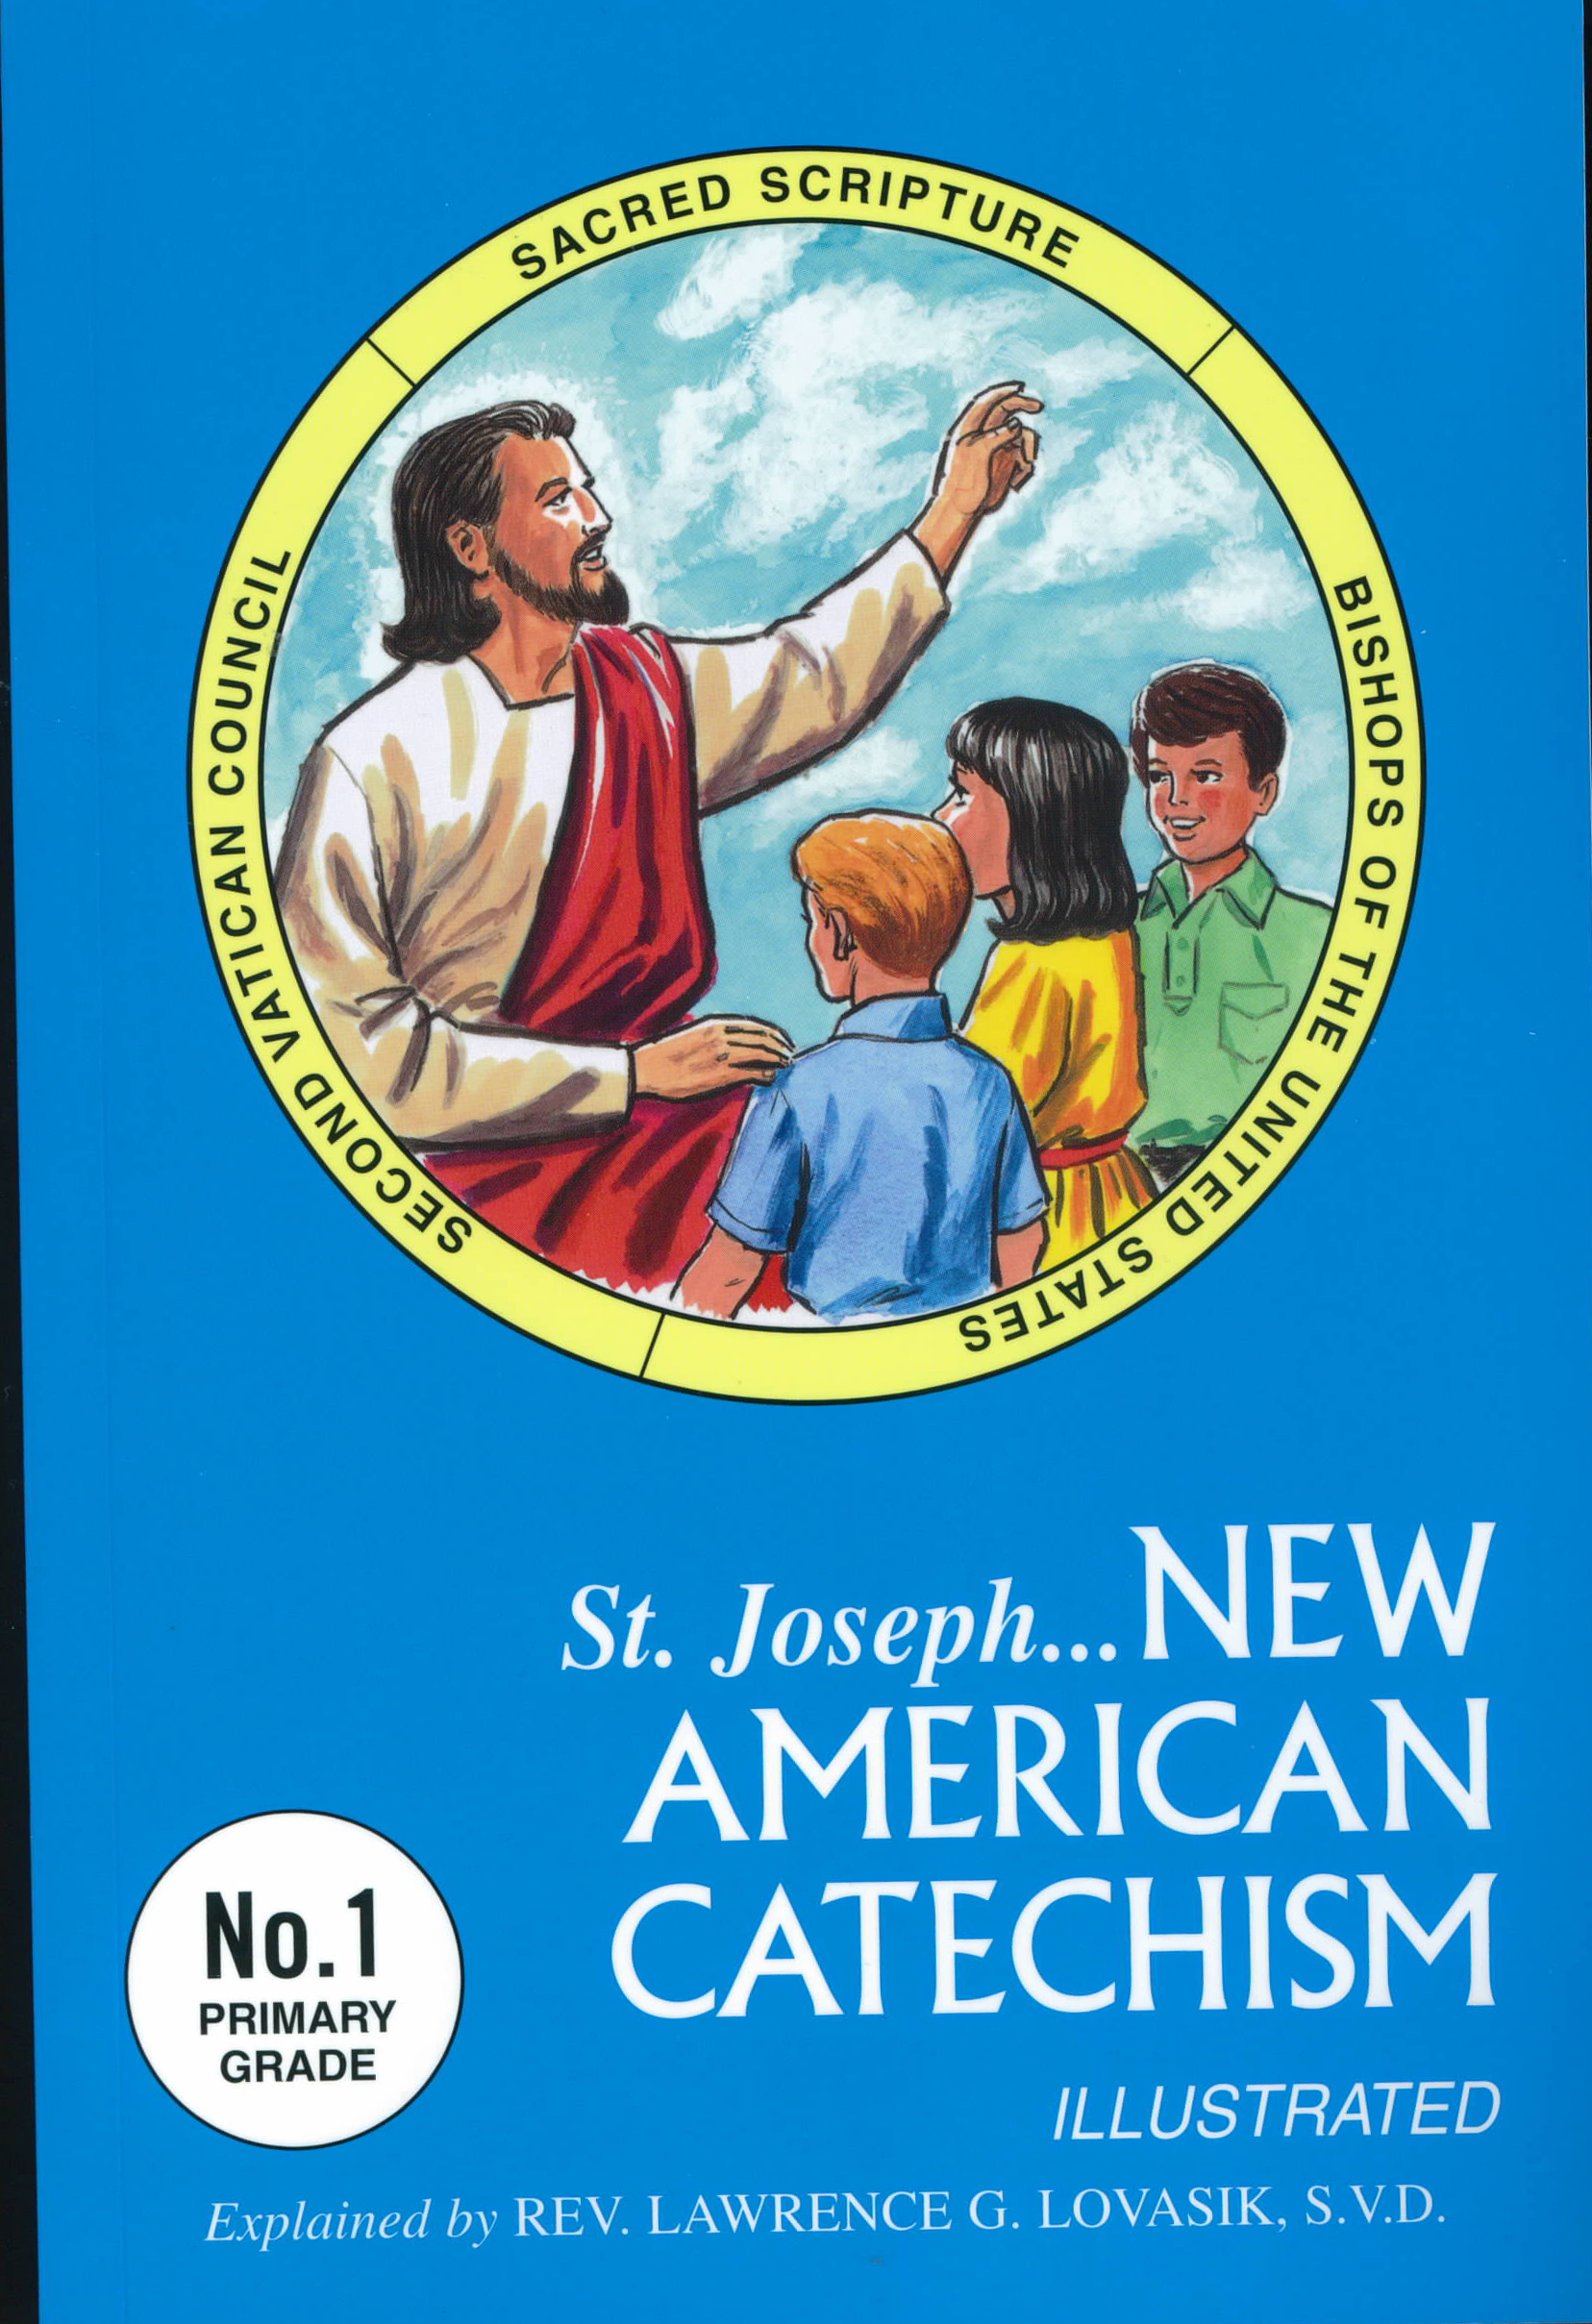 Saint Joseph New American Catechism No 1. Primary Grades 3, 4, and 5 No. 251/05 60-9780899422510 by Catholic Book Publishing